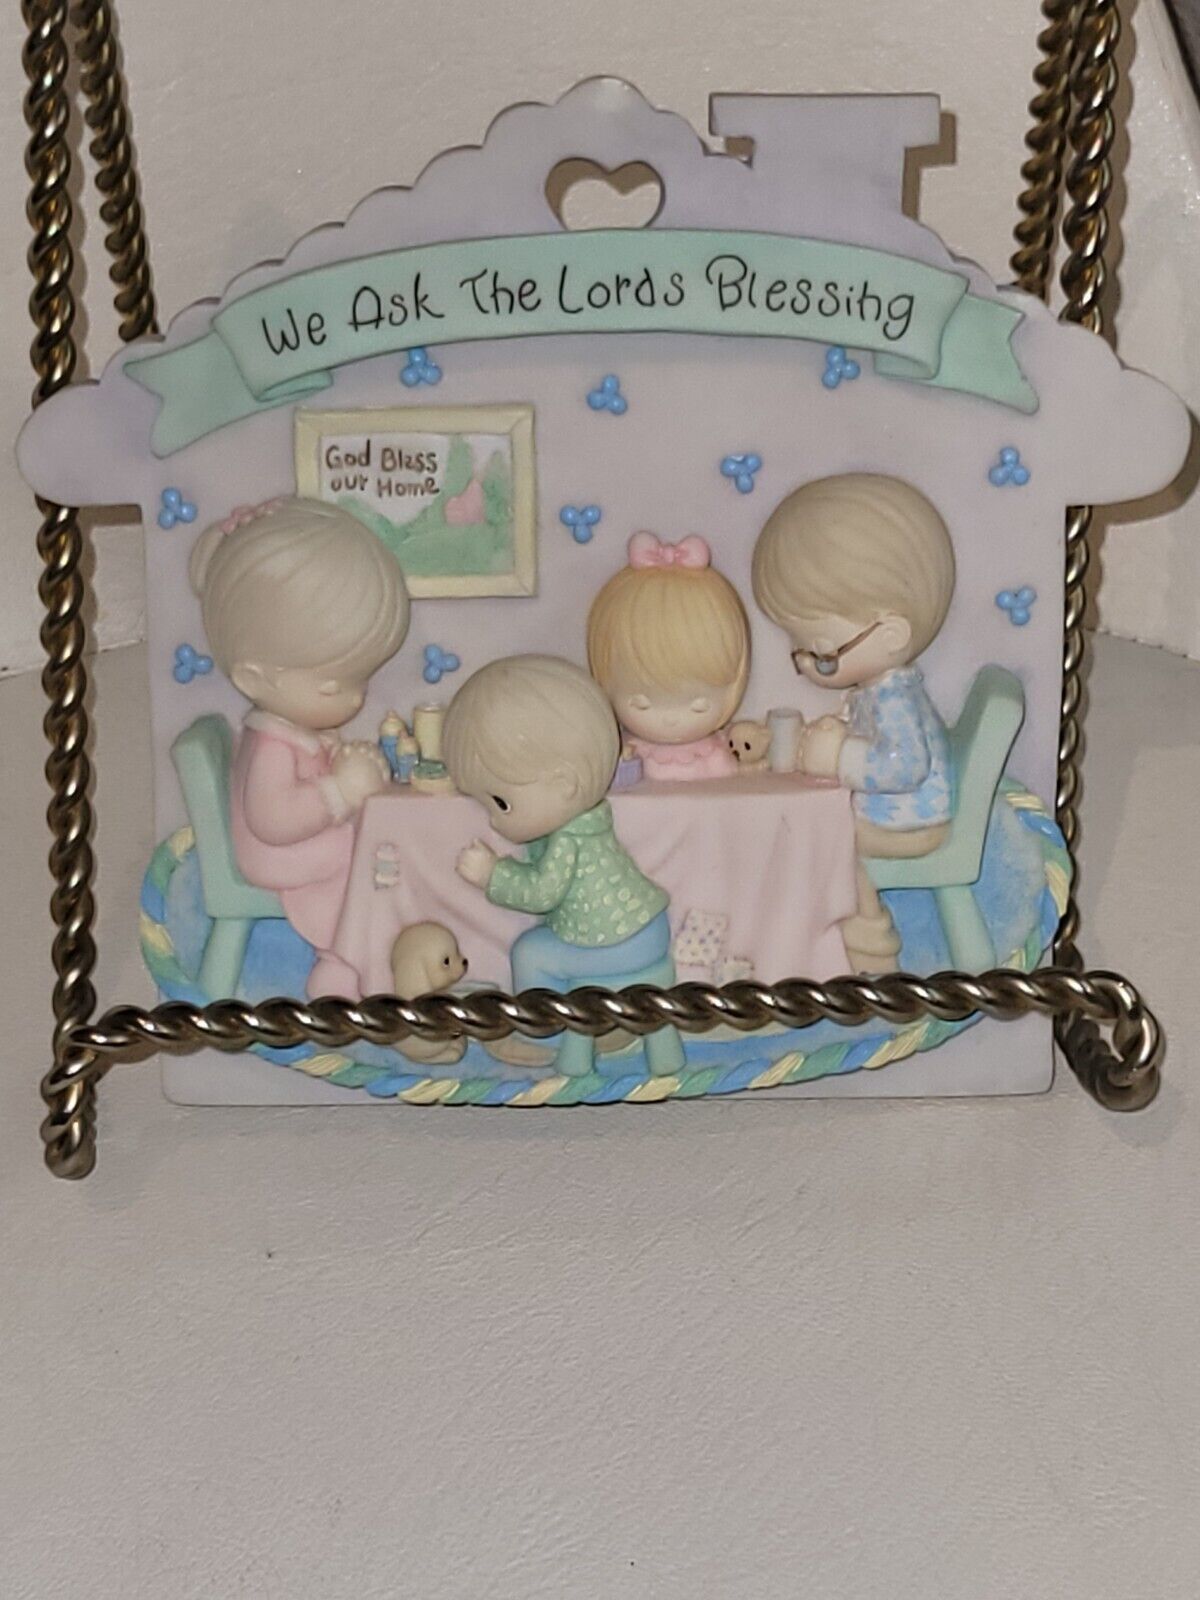 PRECIOUS MOMENTS Wall Plaque "We Ask The Lords Blessing"166588A - $11.30